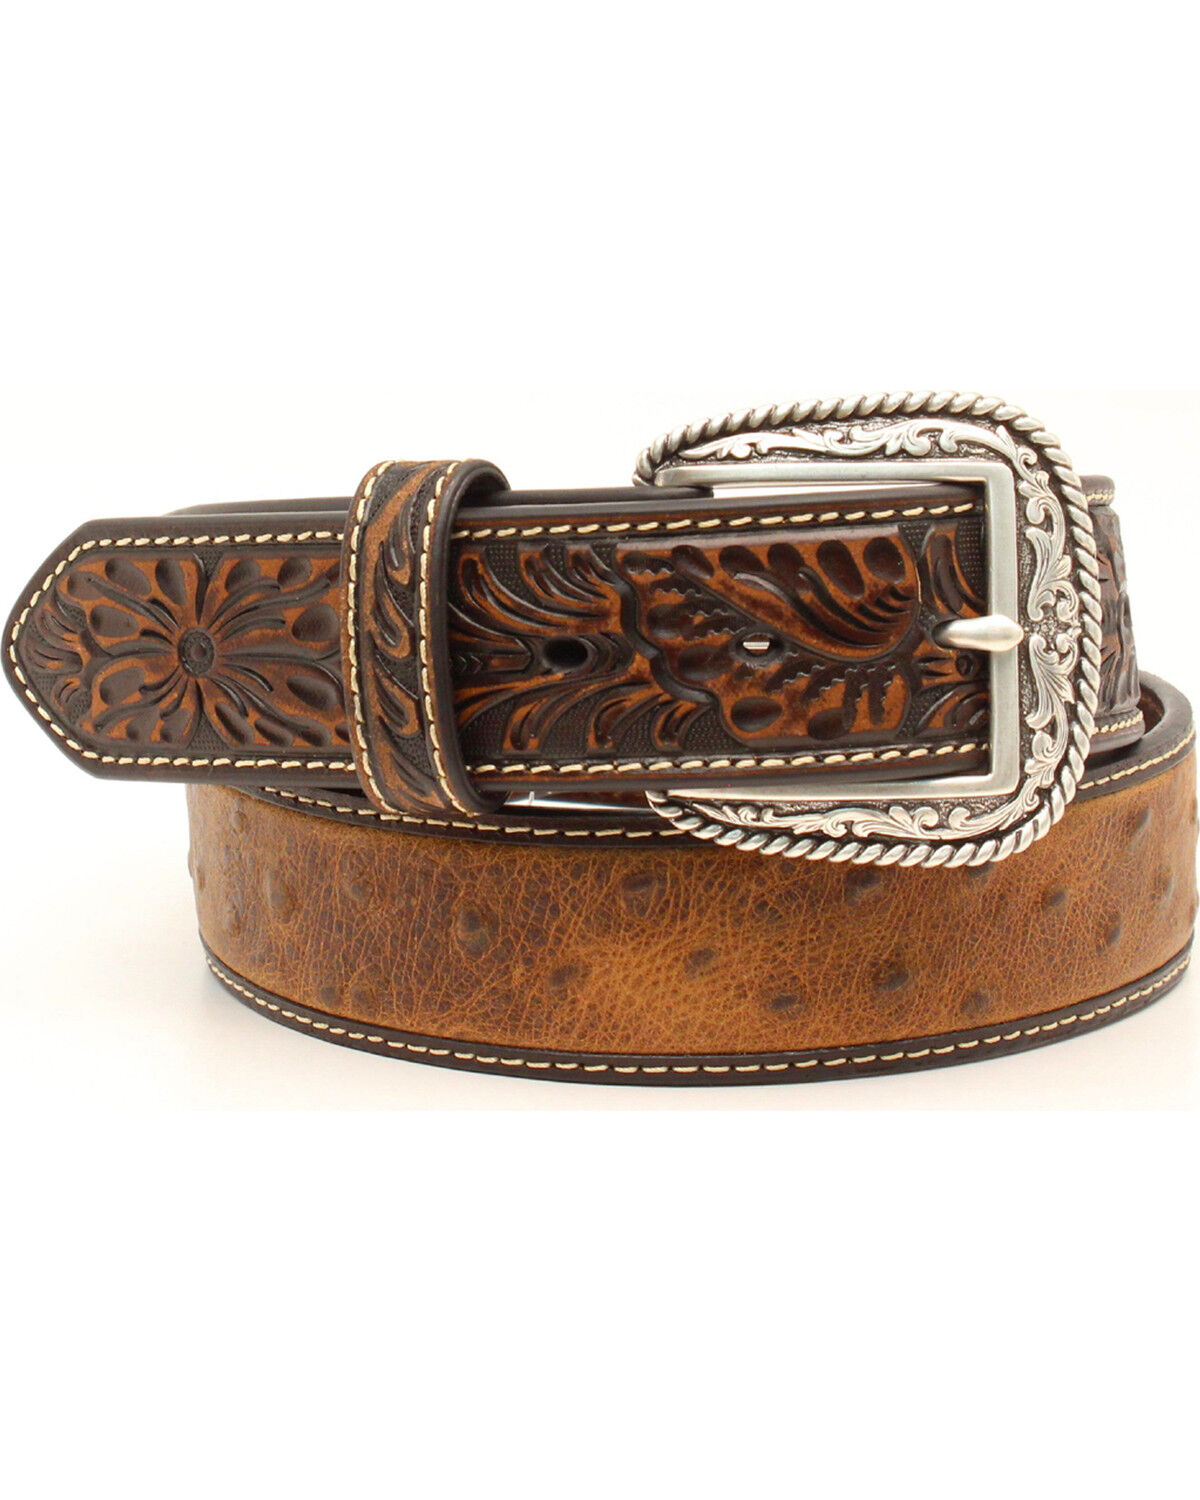 Ariat Western Mens Belt Leather Perforated Adobe Clay A10011717 